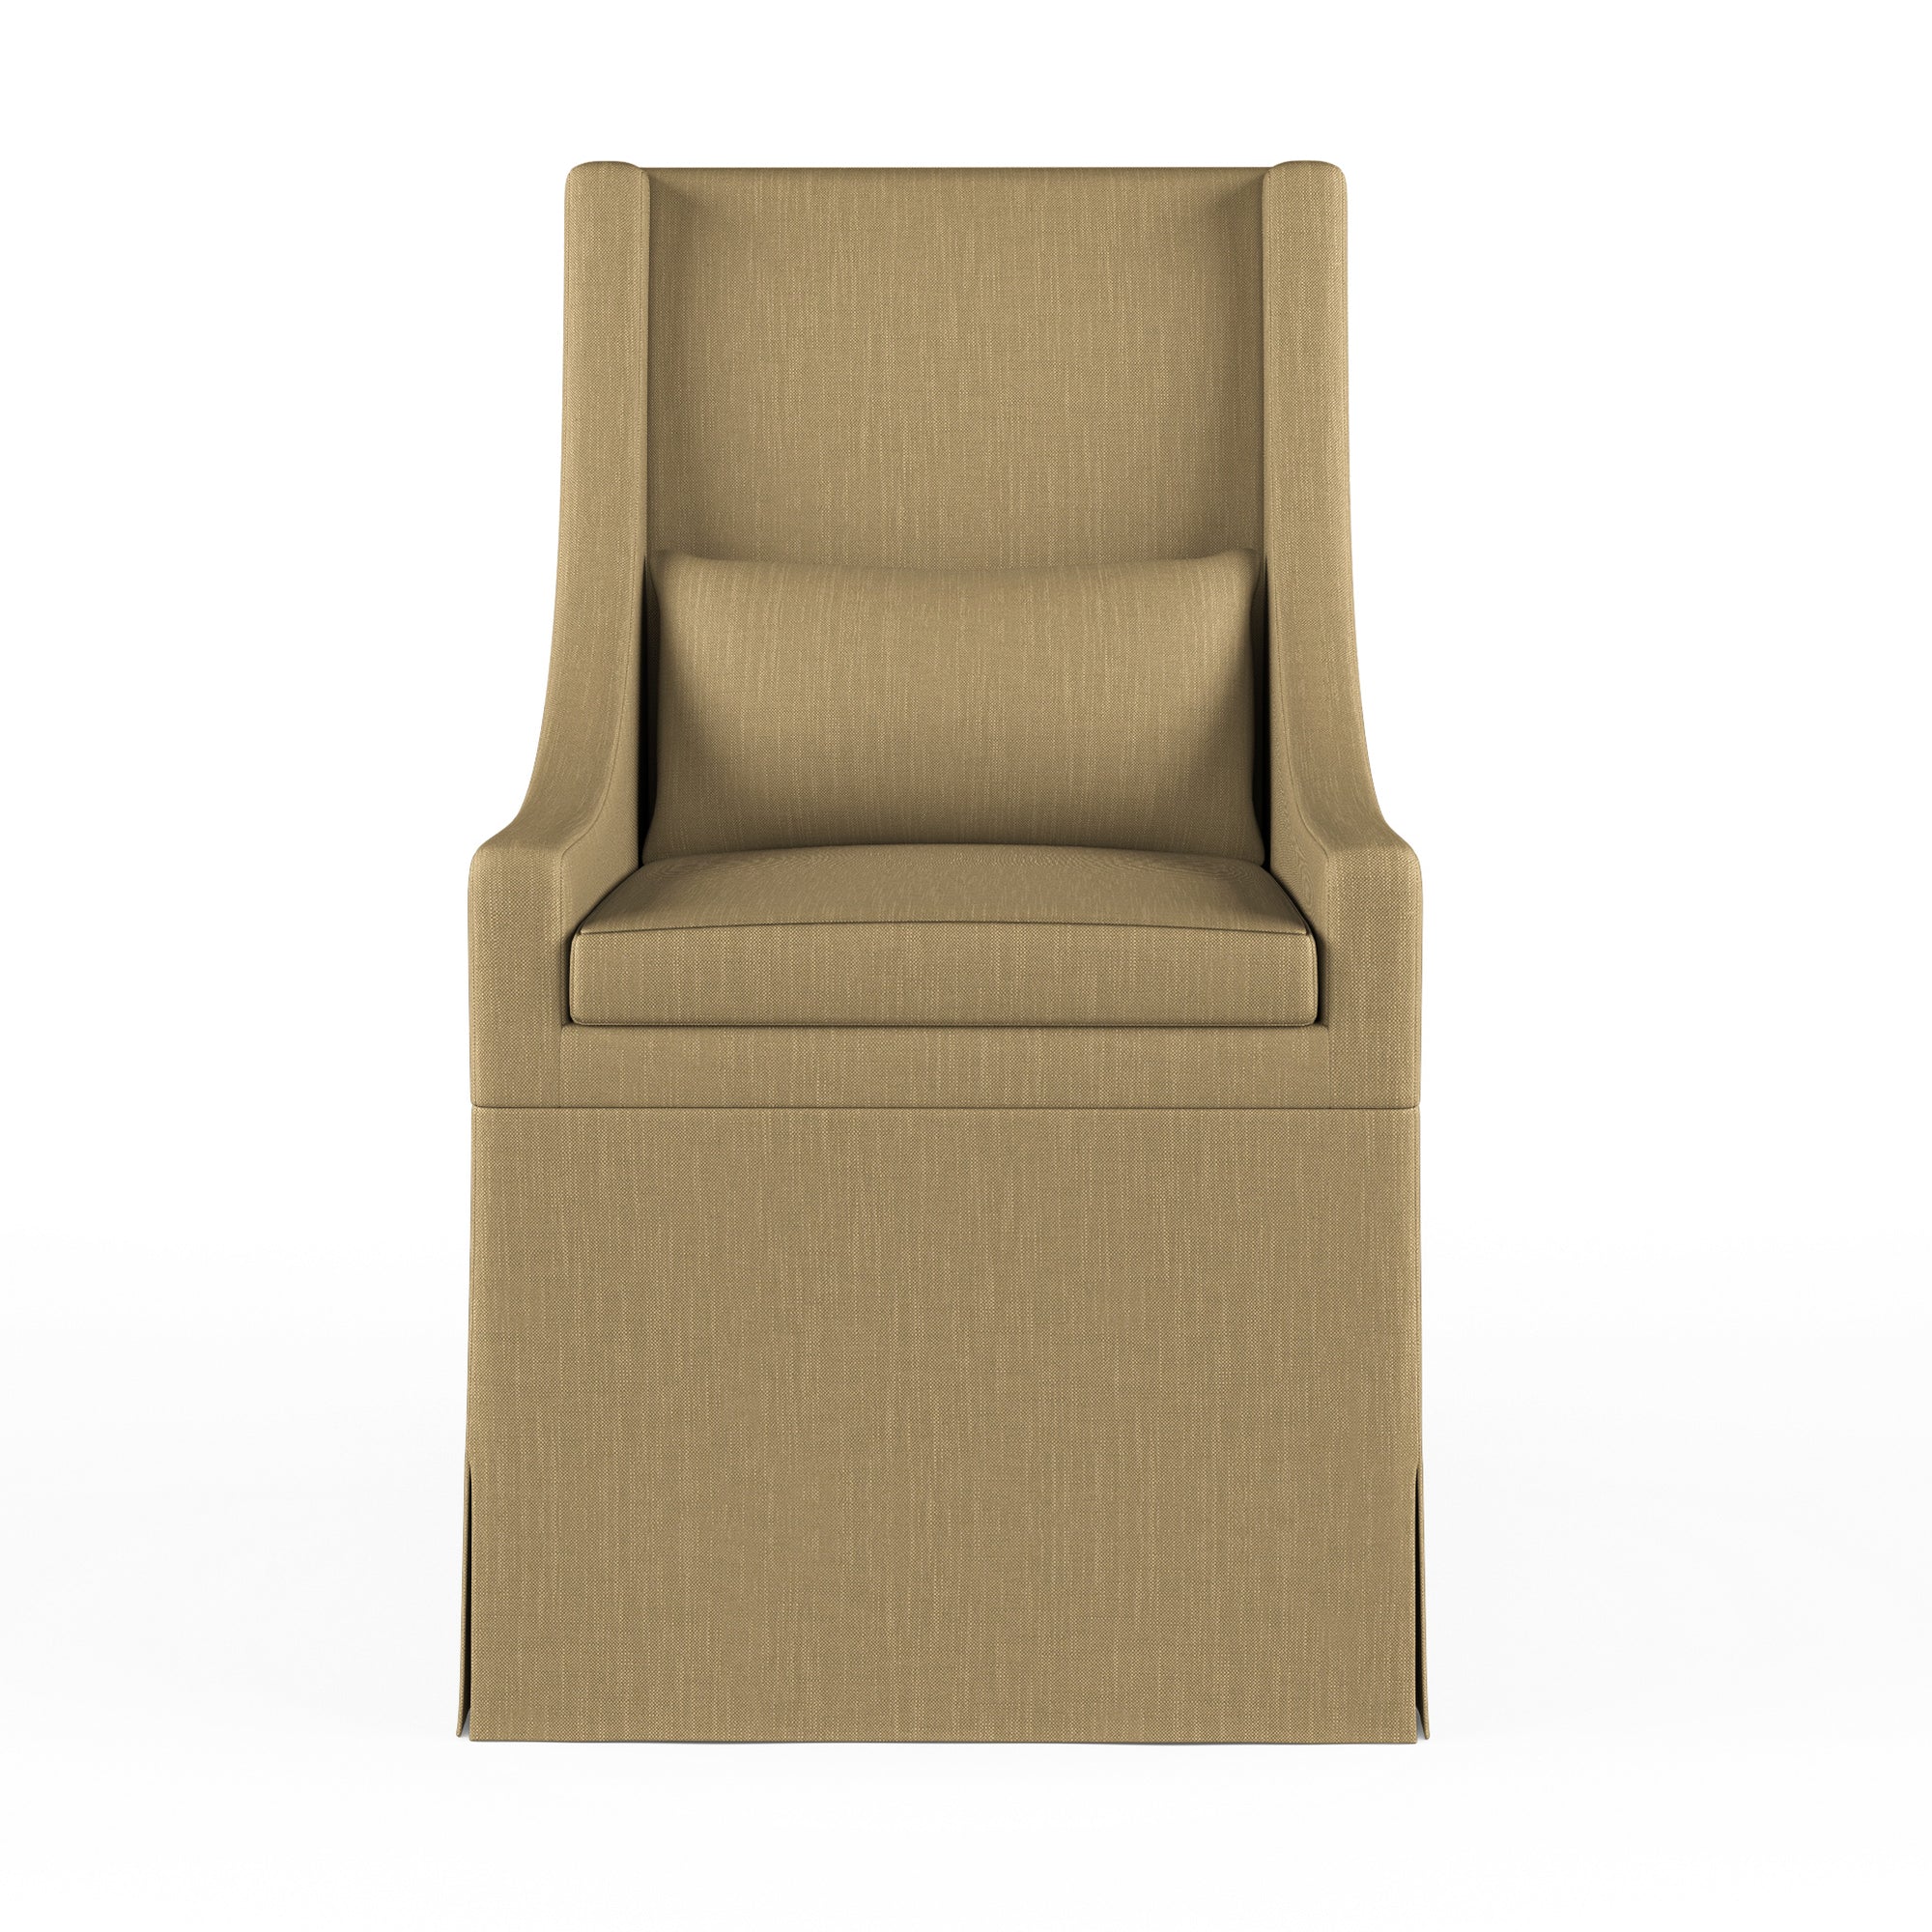 Serena Dining Chair - Marzipan Box Weave Linen